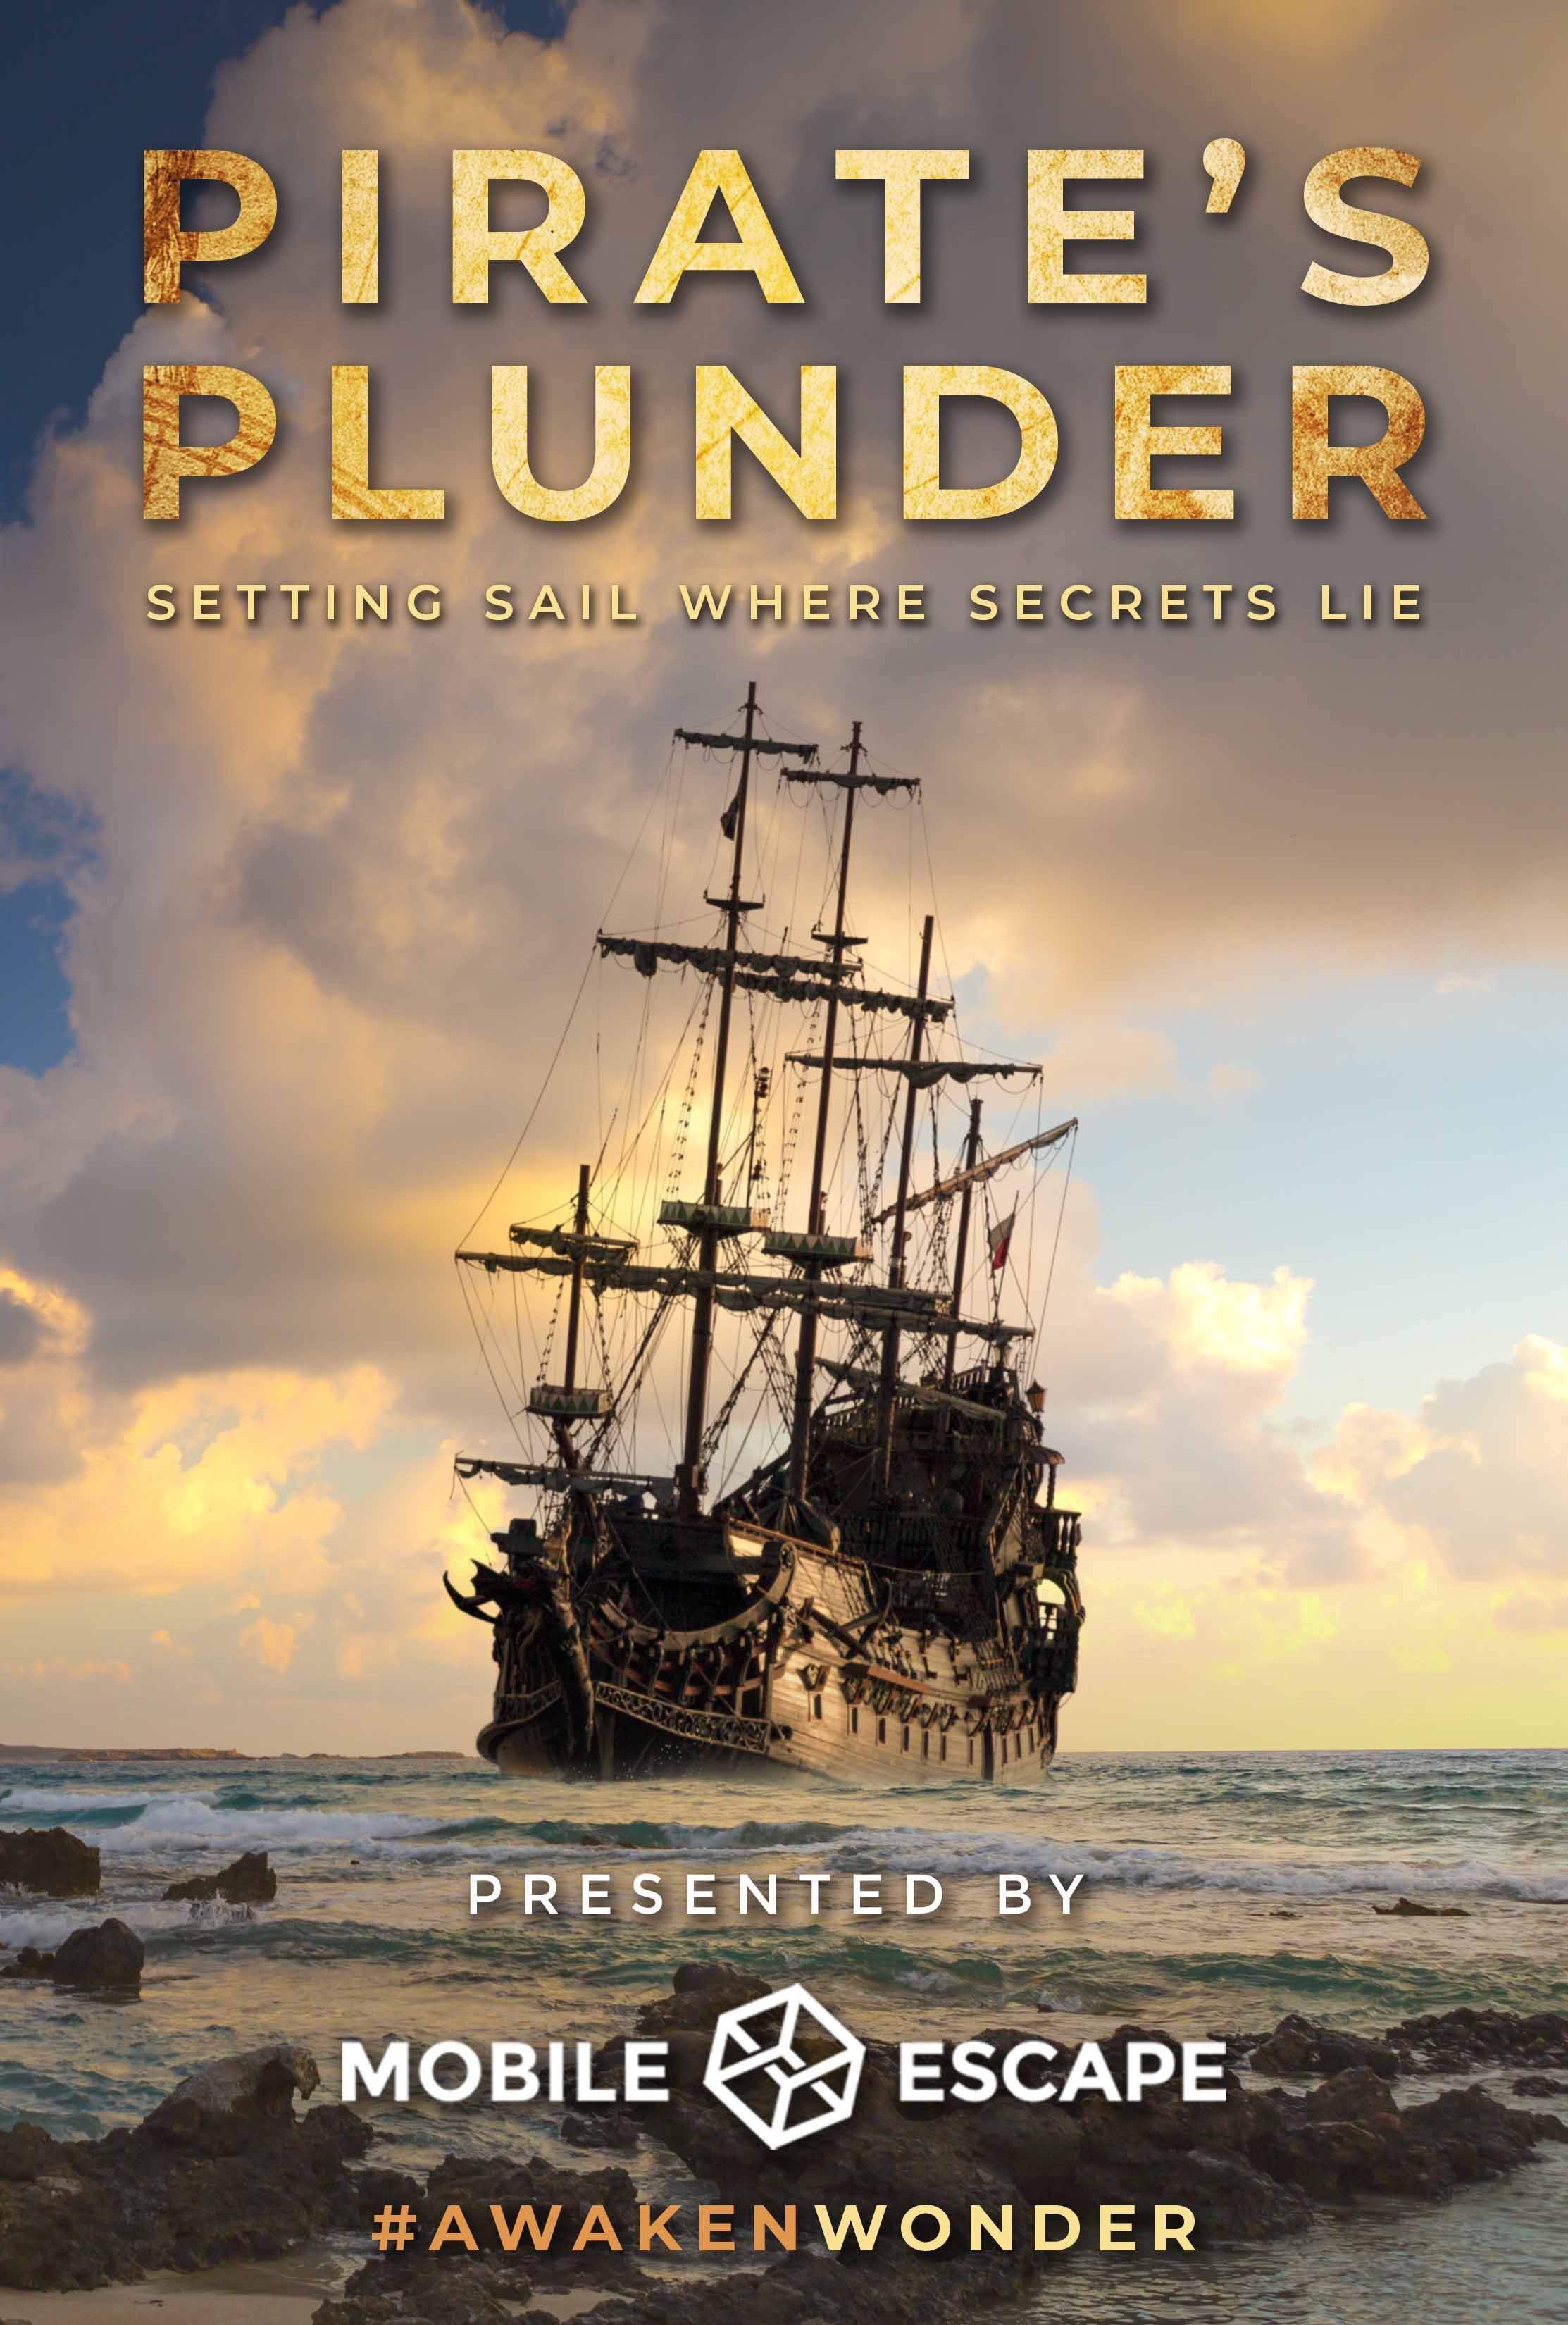 Pirate's Plunder Poster_small.jpg